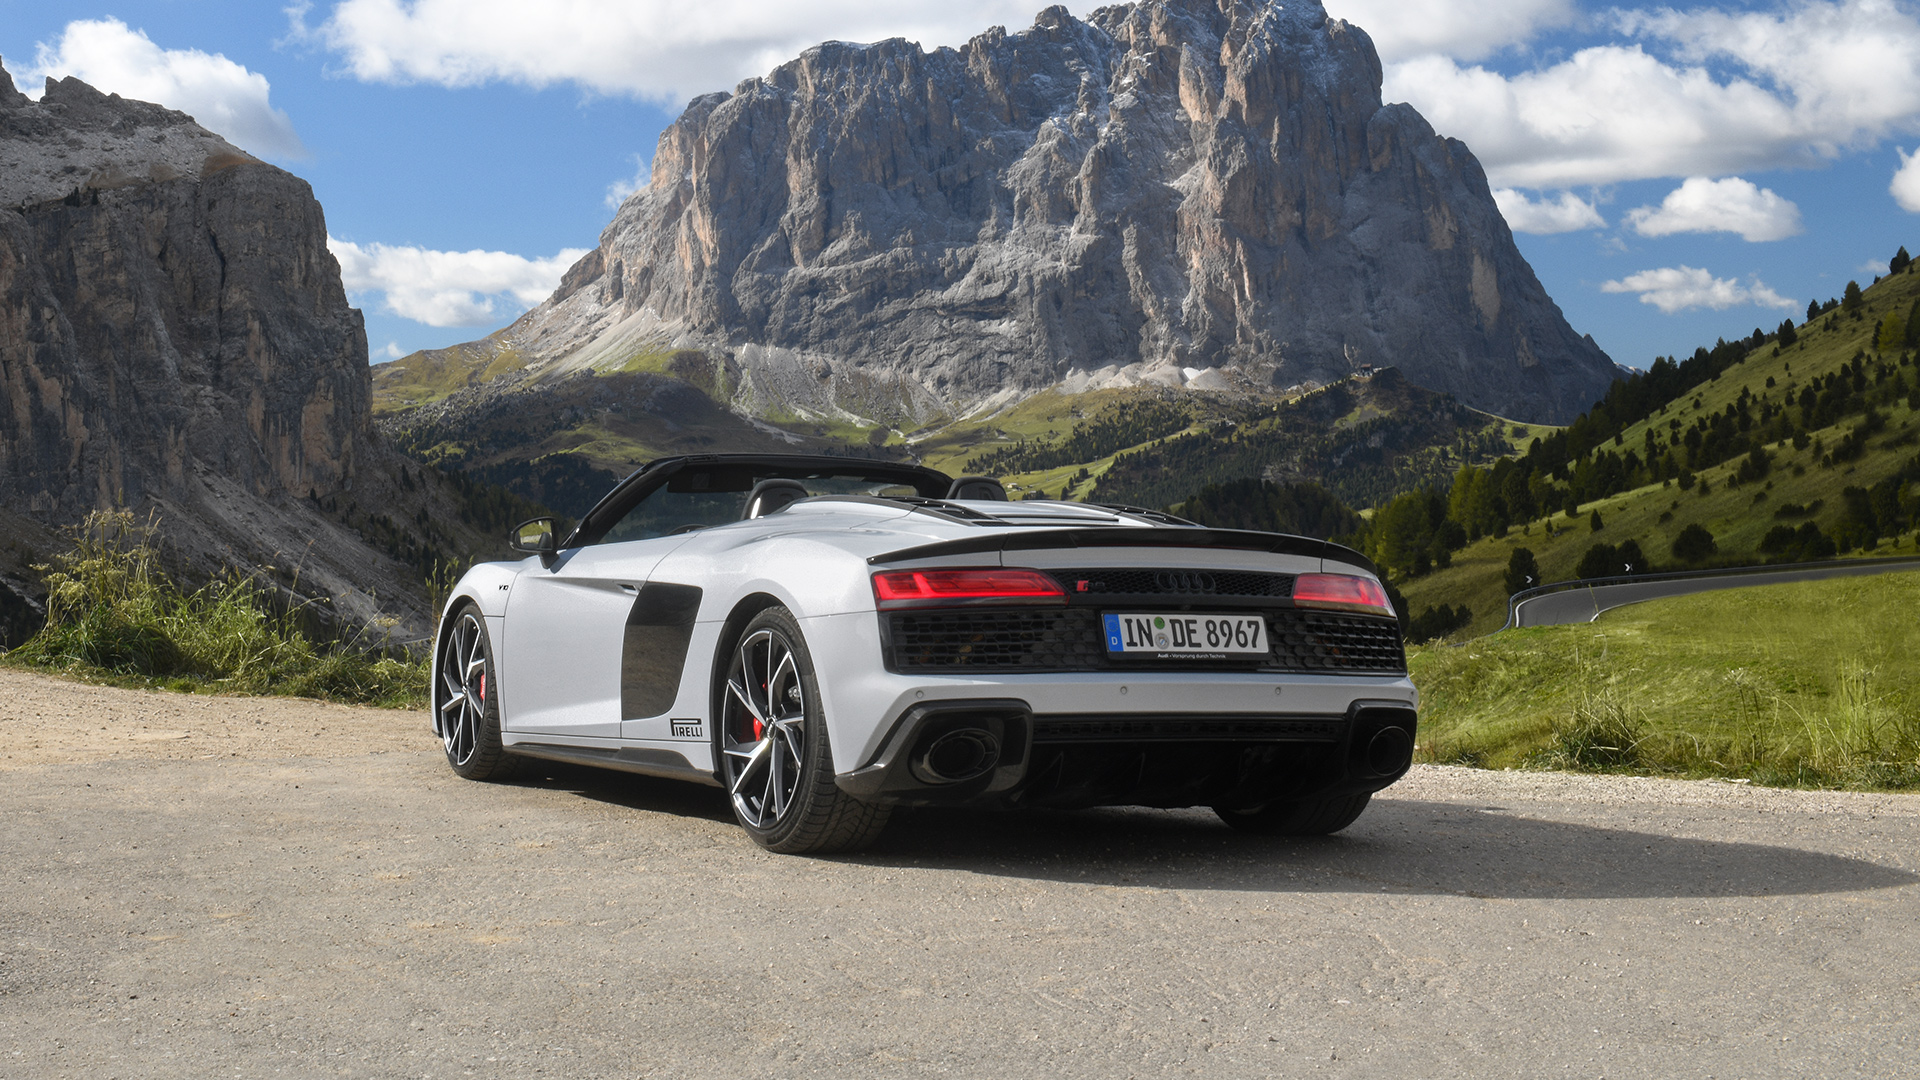 White Audi R8 Spyder V10 performance quattro with open top (rear view) stands in the mountains at best weather